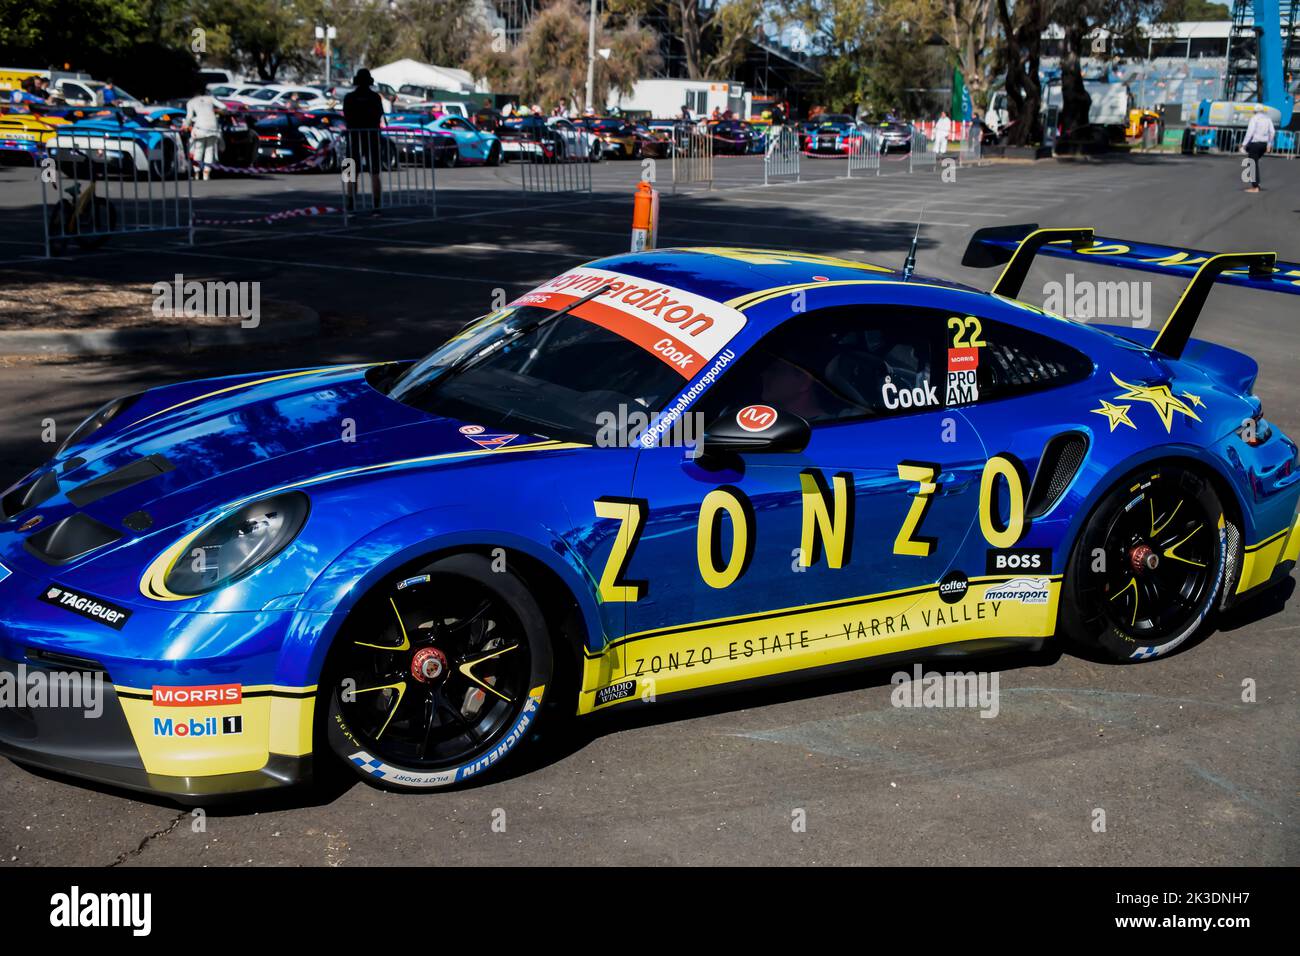 The luxurious cars at the Porsche Carrera cup down at Albert Park during the Australian F1 Grand Prix Stock Photo